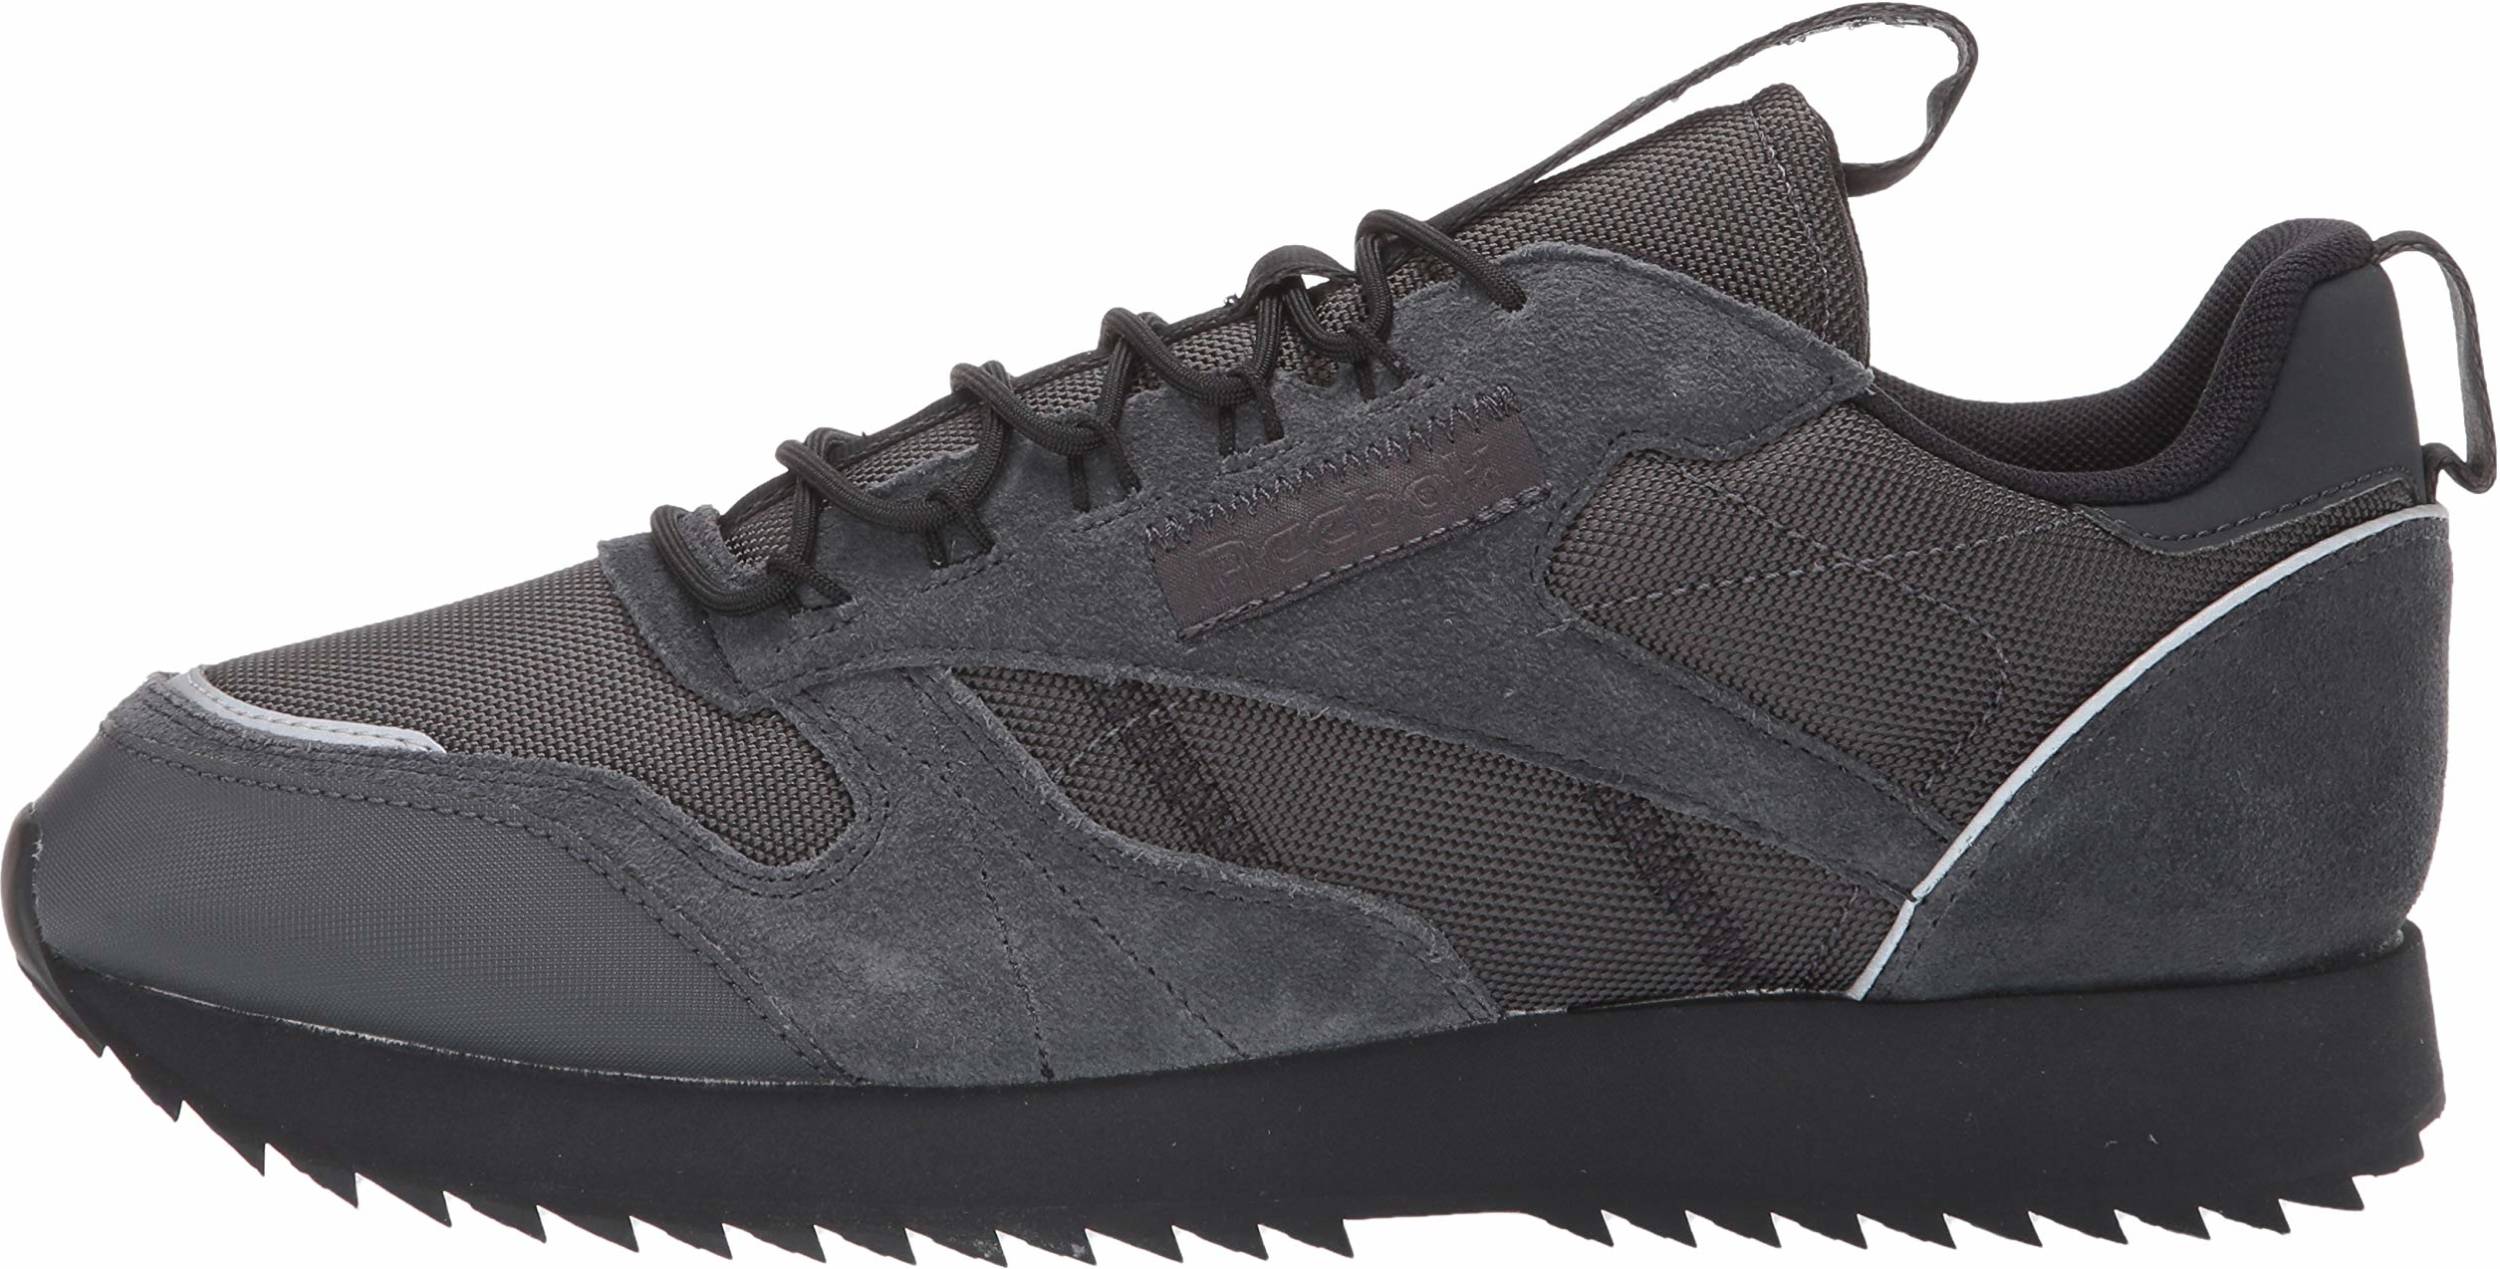 reebok sports shoes online purchase